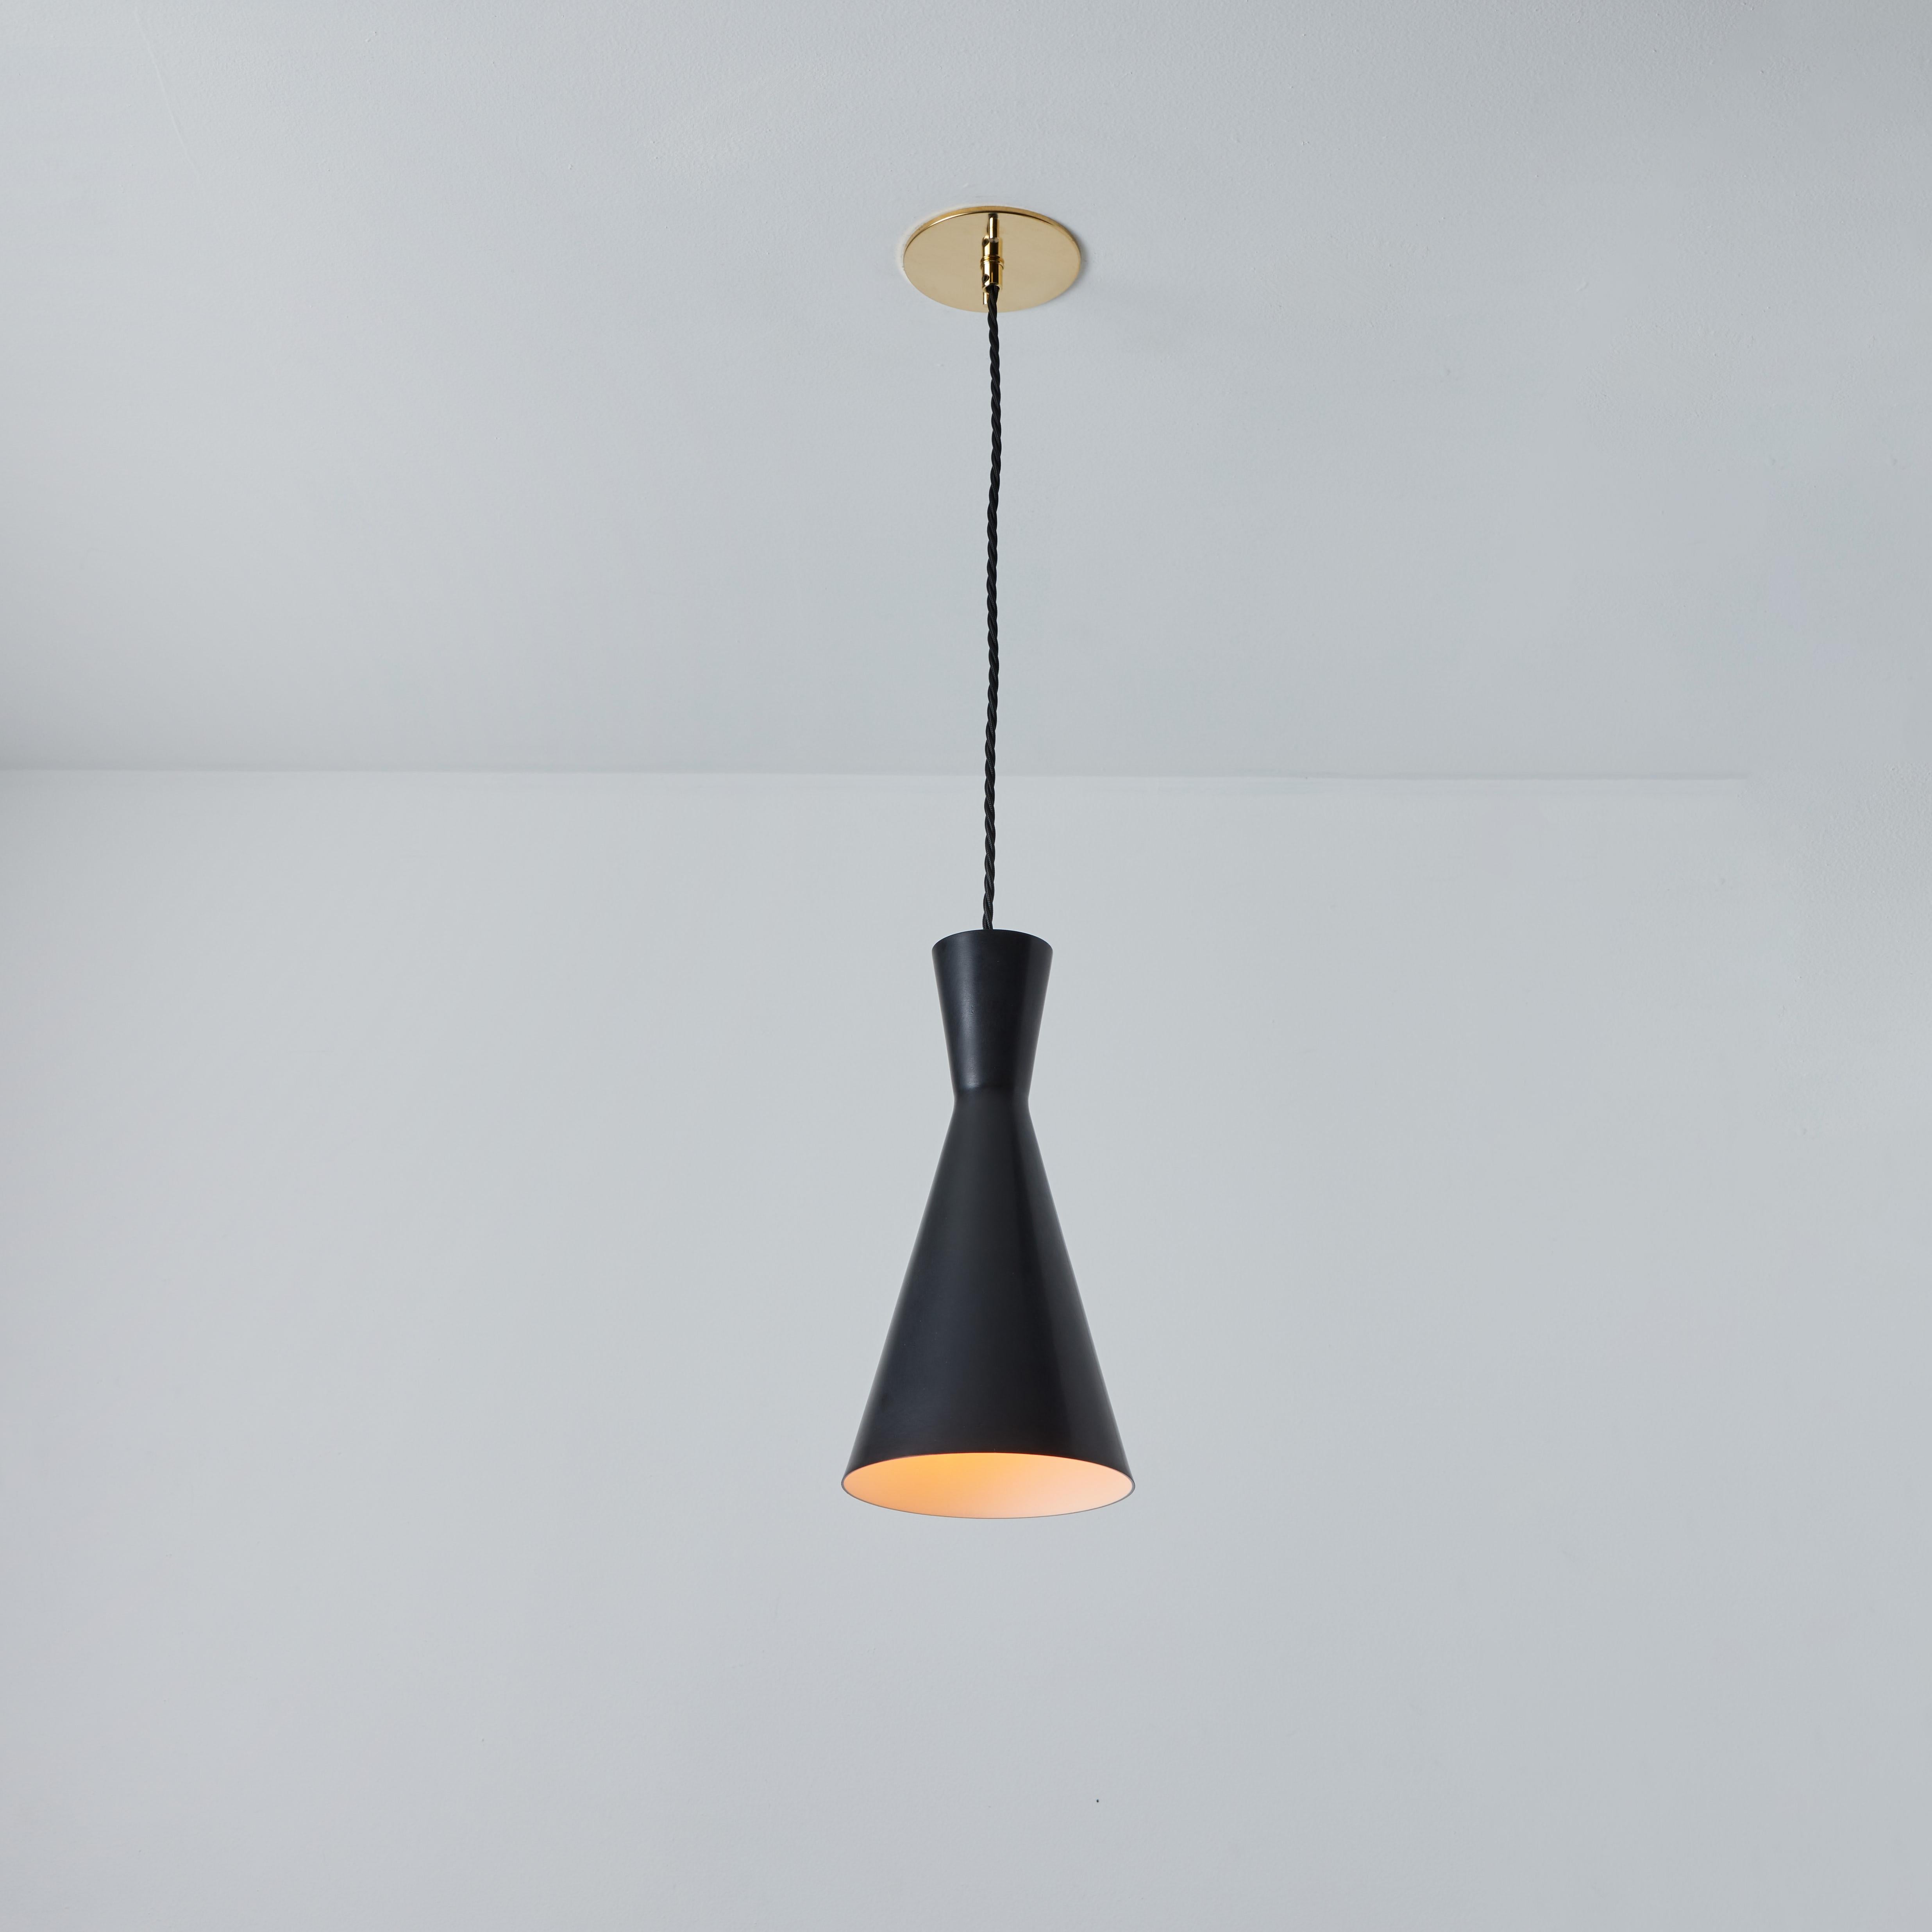 1950s Black metal Diabolo pendant lamp attributed to Stilnovo. Executed in black painted metal with new black cloth cord and custom fabricated period style brass canopy for mounting over a standard American j-box. An incredibly refined and clean